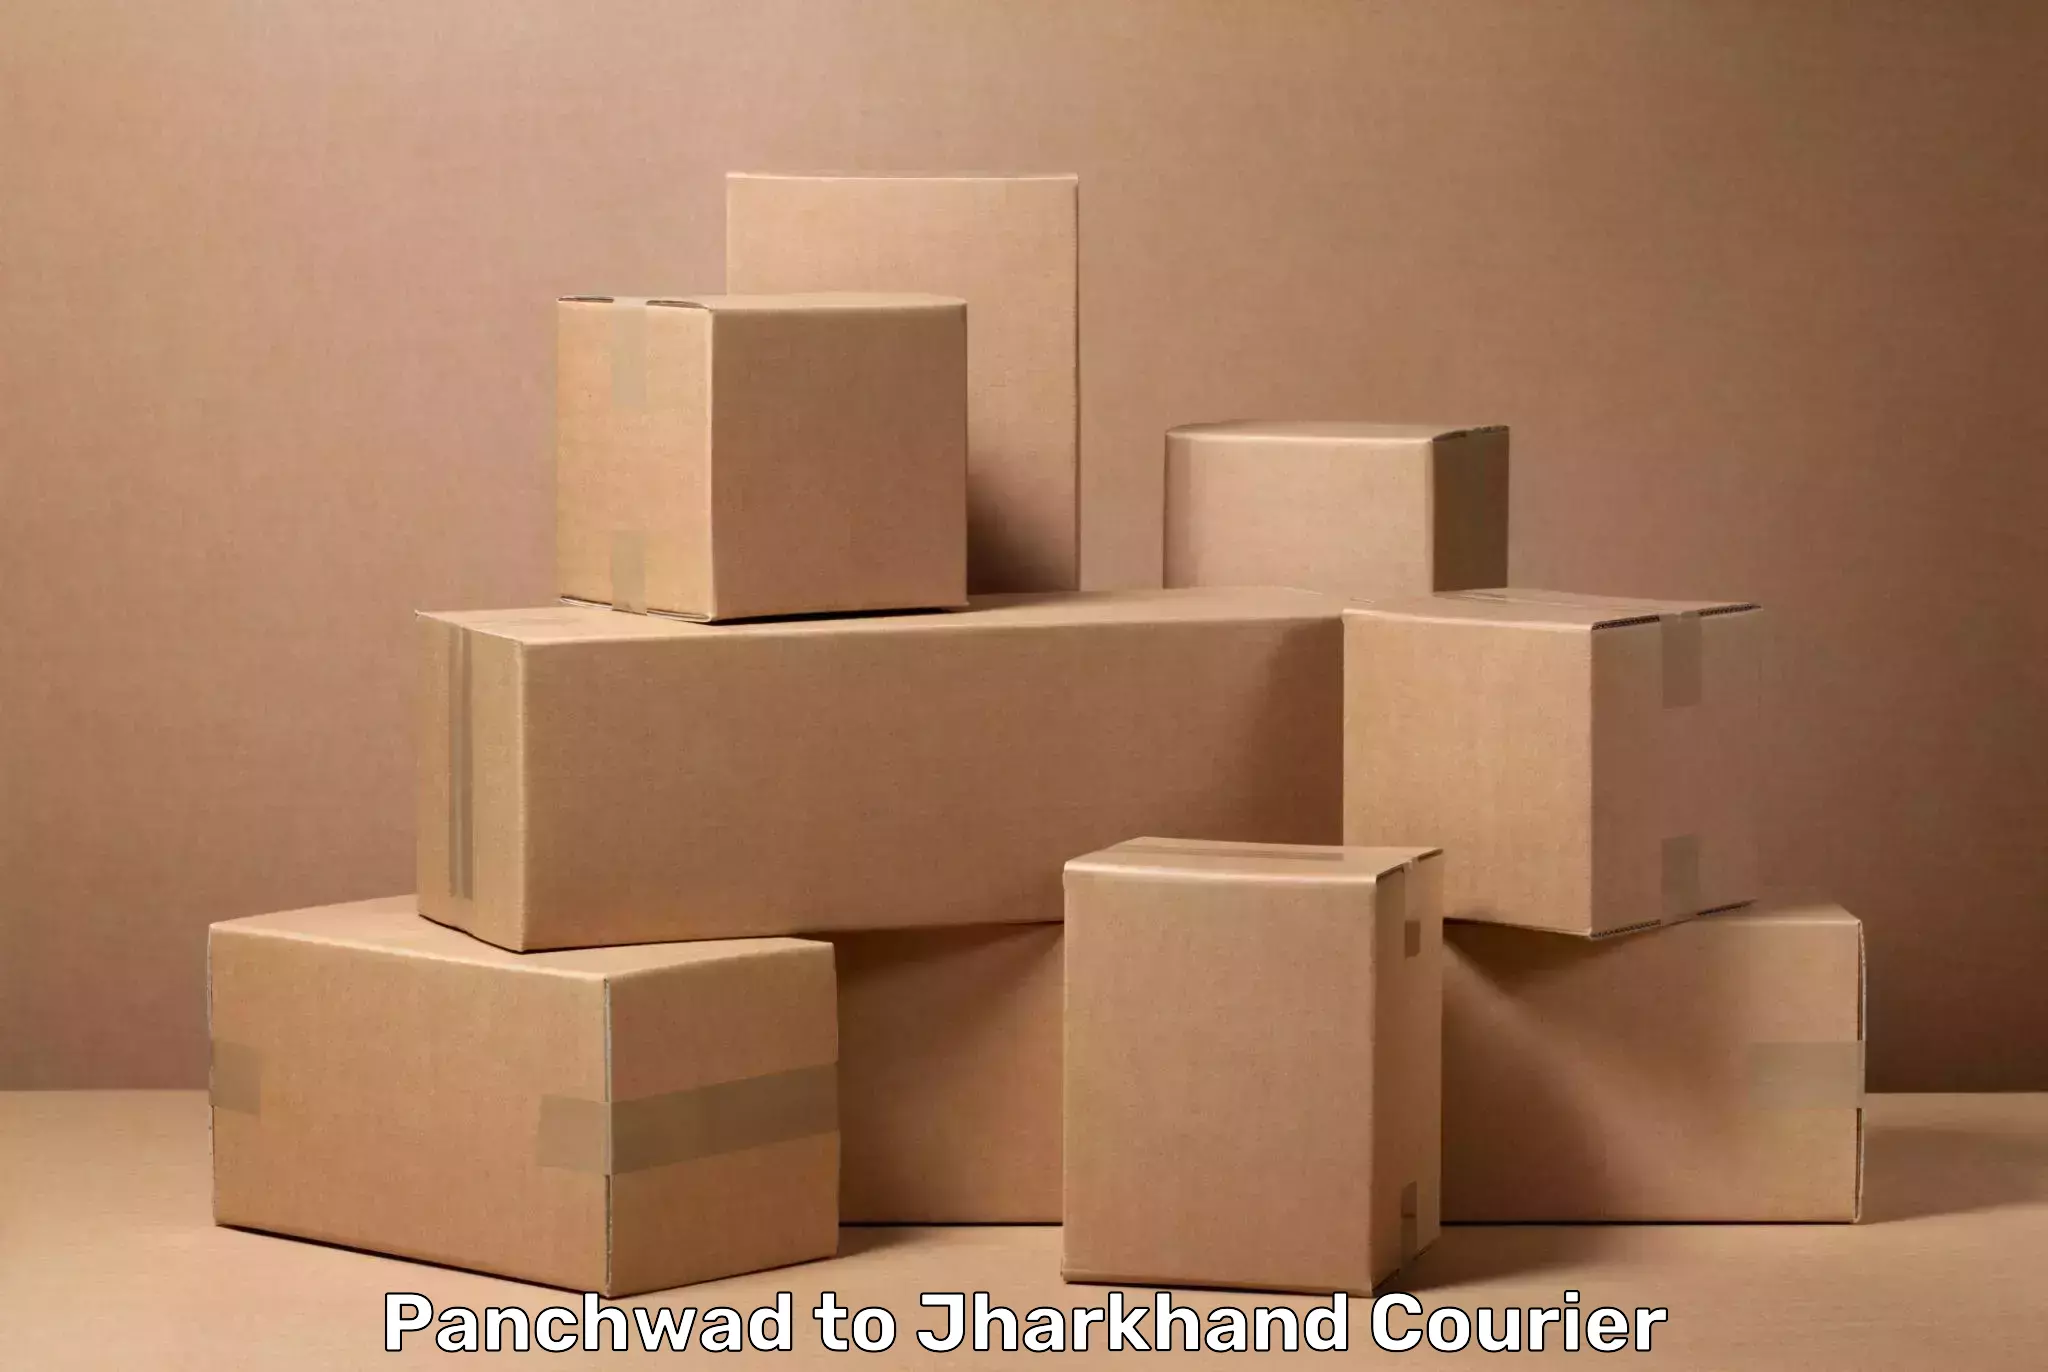 Luggage shipment specialists Panchwad to Jamshedpur